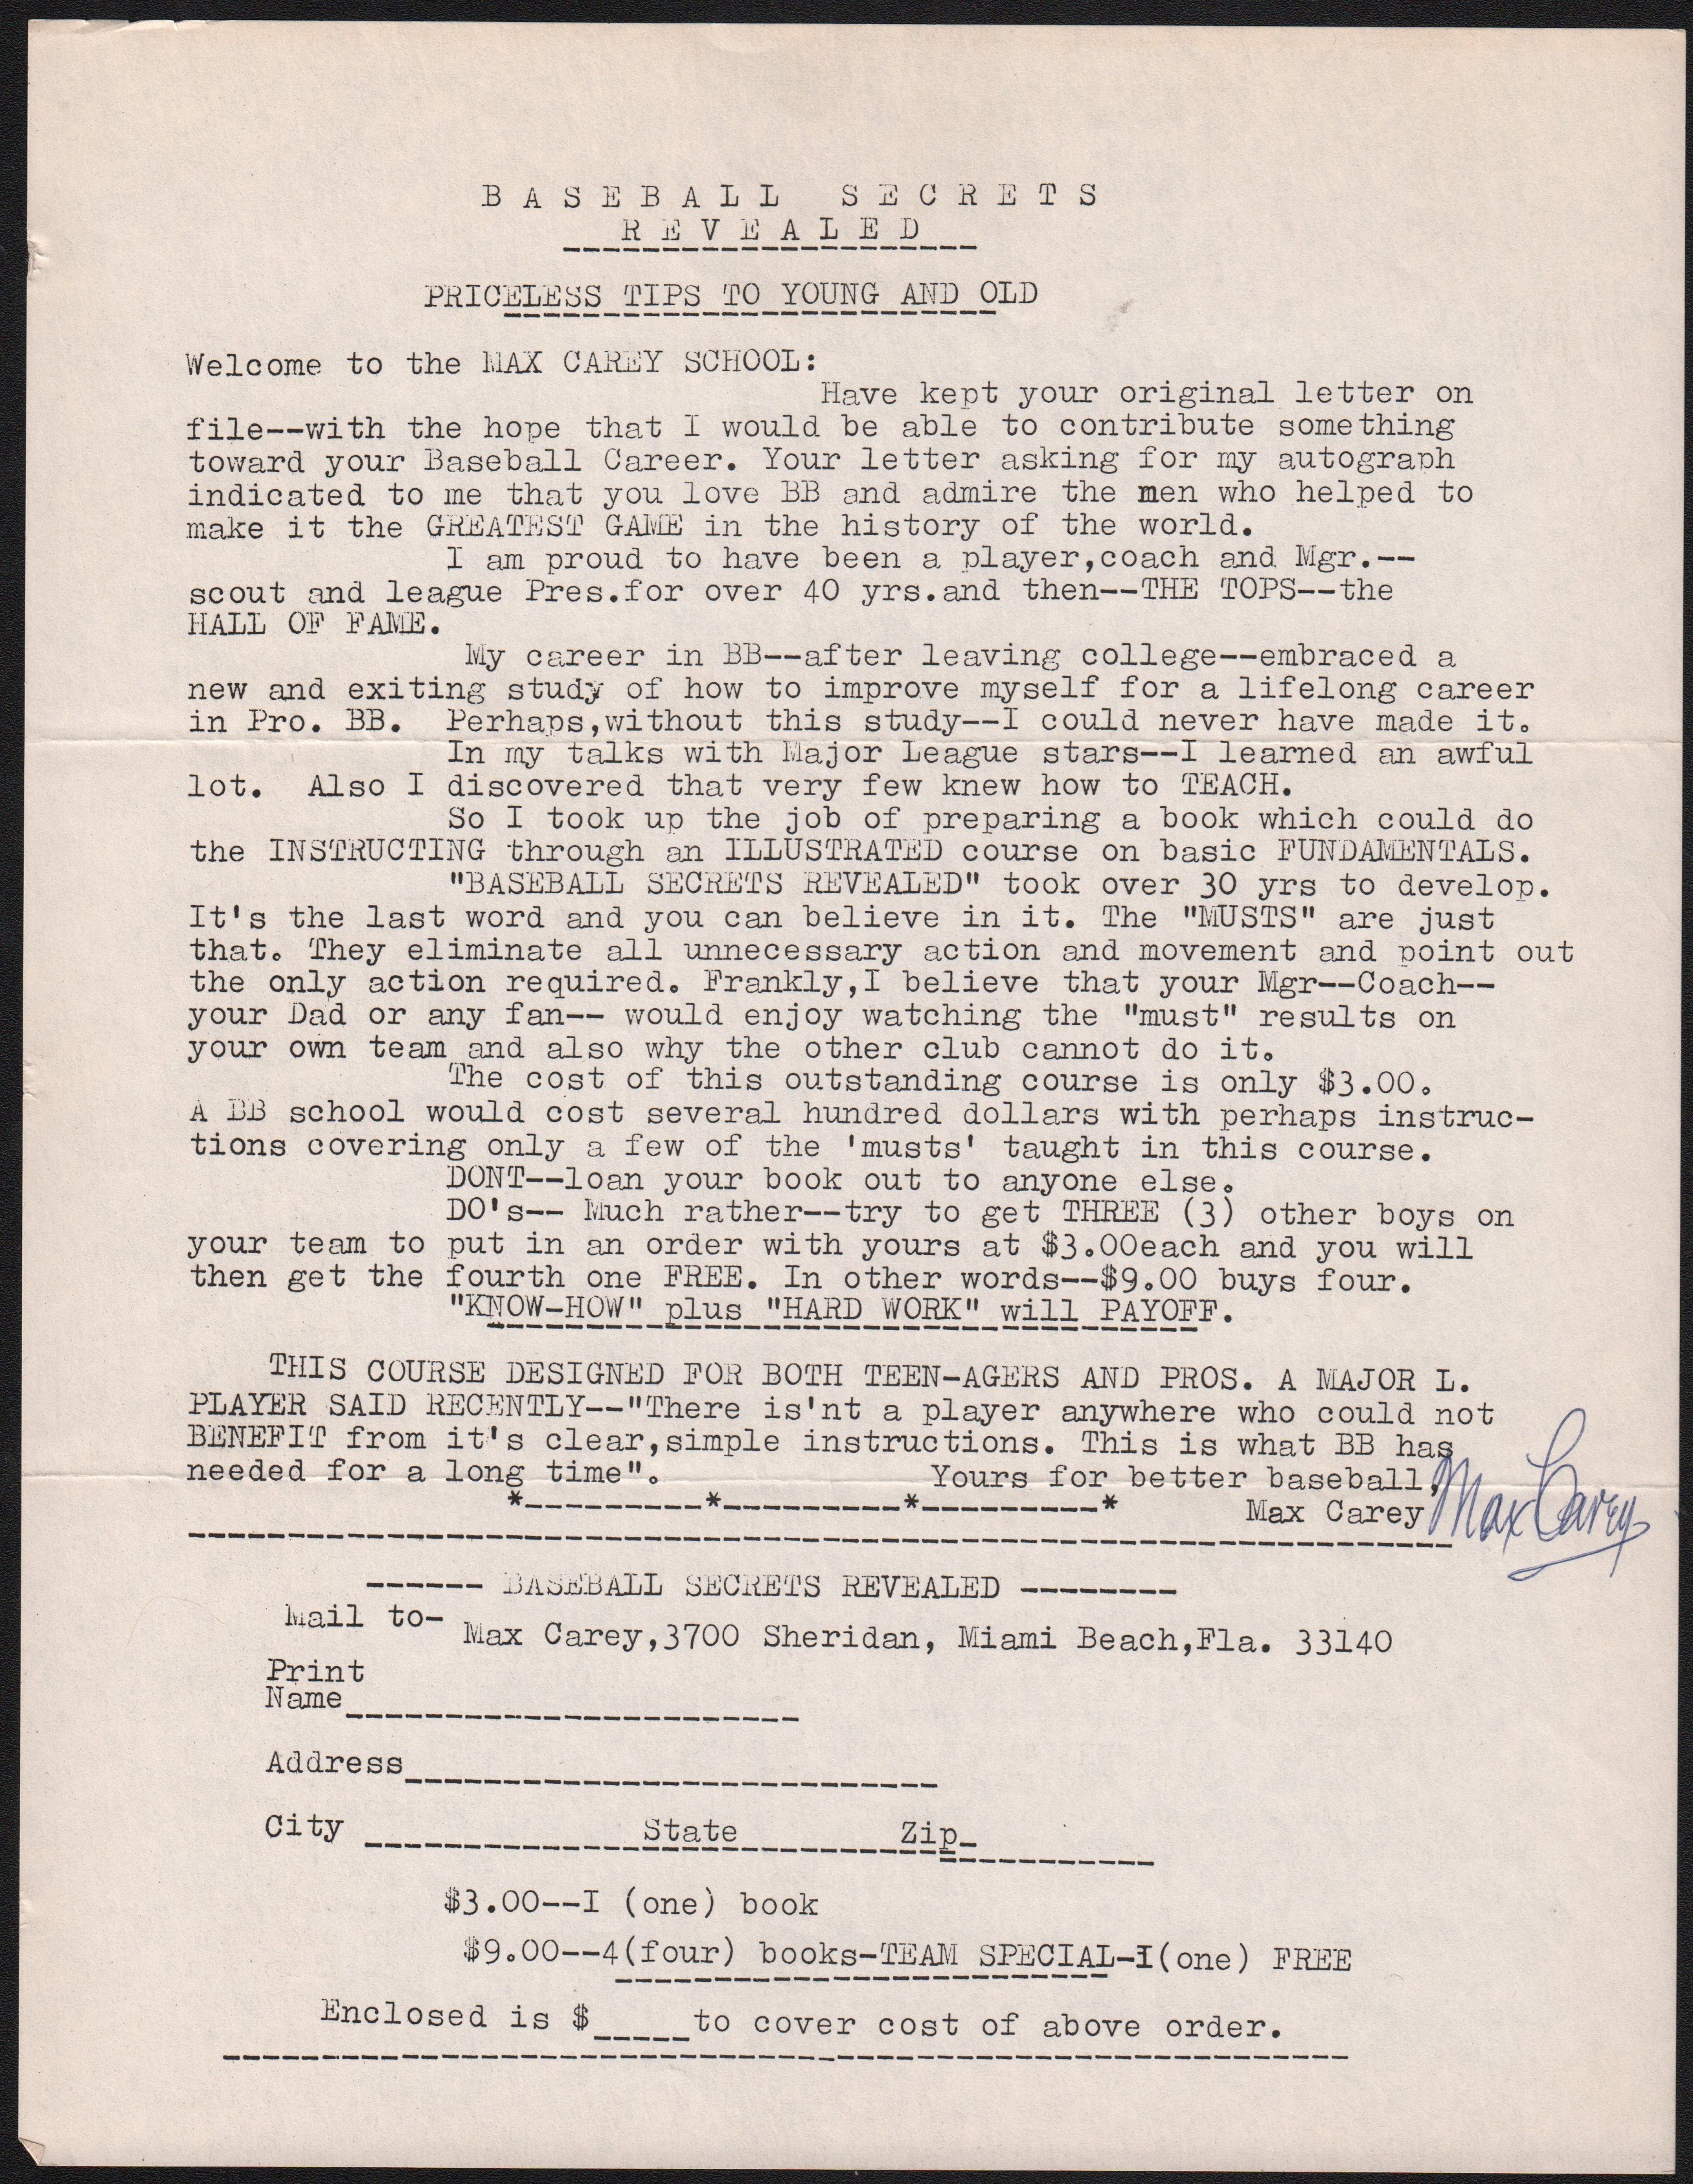 Baseball Autographs - Max Carey Letter w/ "Greatest Game In the History of the World Content".